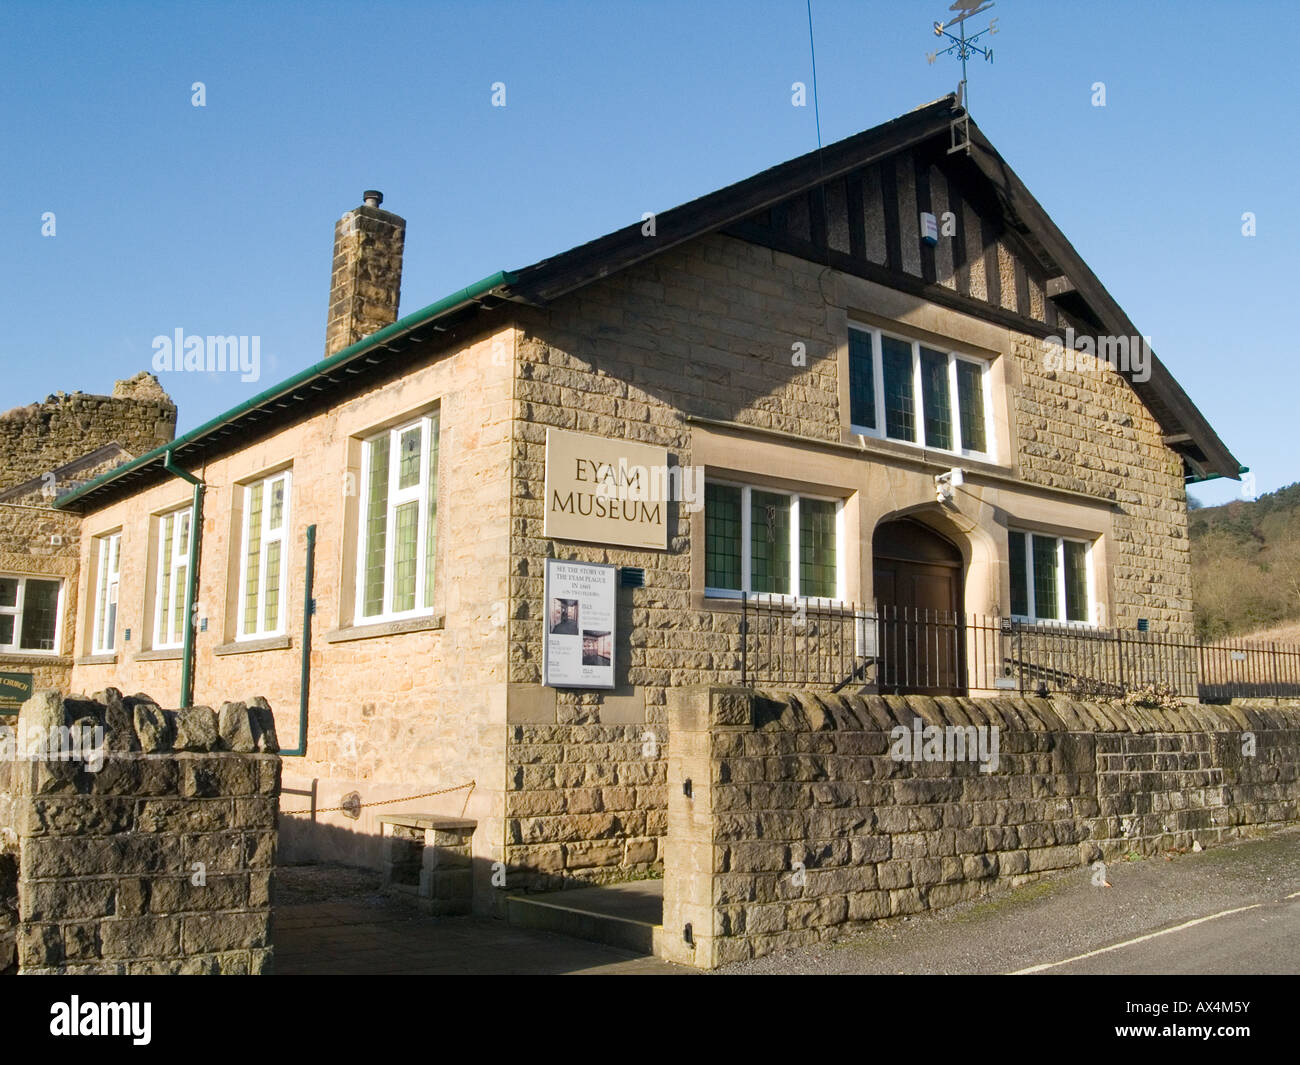 The Eyam Museum, in the village of Eyam in the Peak District Derbyshire UK Stock Photo